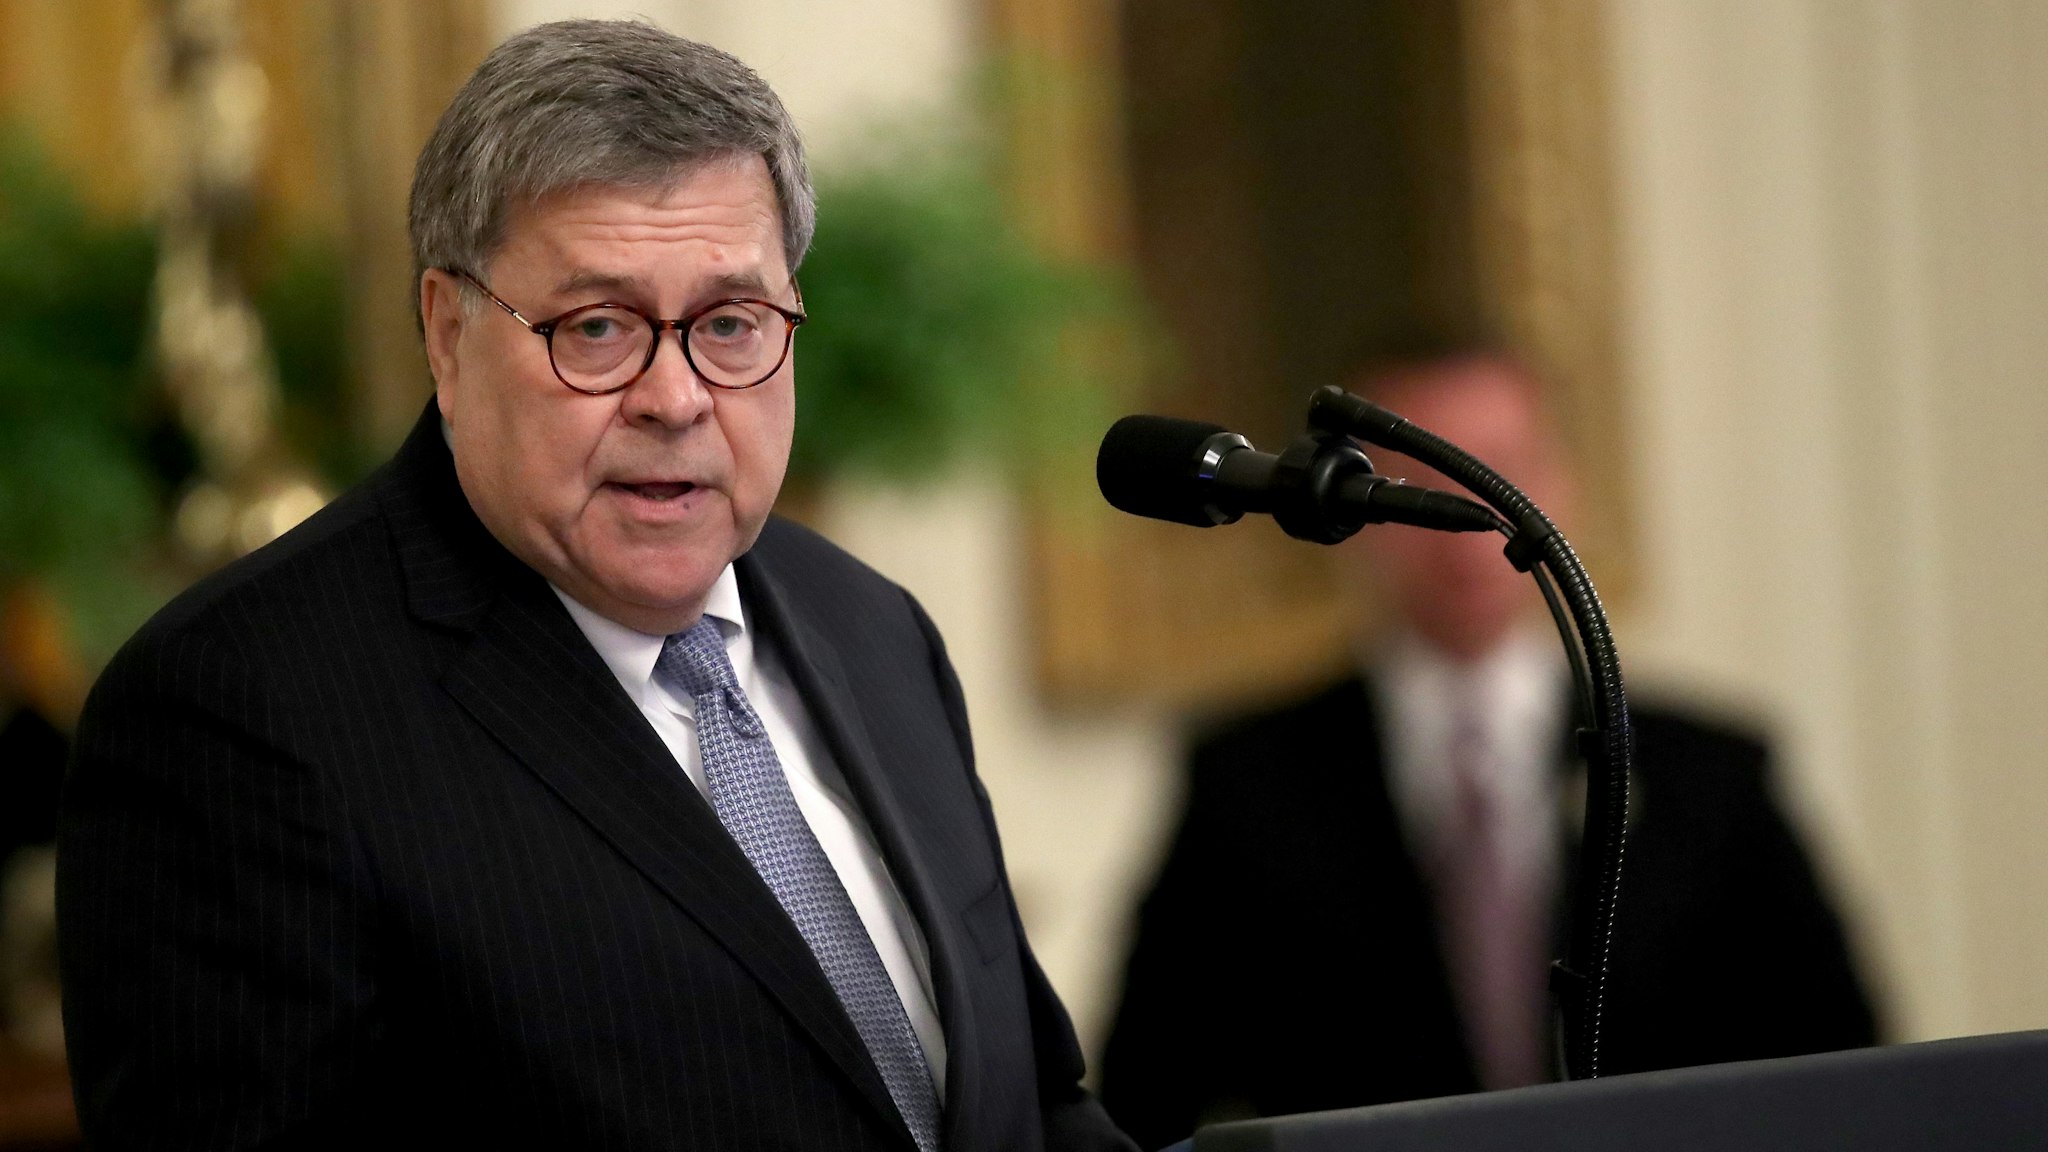 SEPTEMBER 09: U.S. Attorney General William Barr delivers remarks during a White House ceremony September 9, 2019 in Washington, DC. During the ceremony, U.S. President Donald Trump awarded the Medal of Valor to six police officers for their actions during the recent shooting in Dayton, Ohio where nine people died and dozens of others were injured.